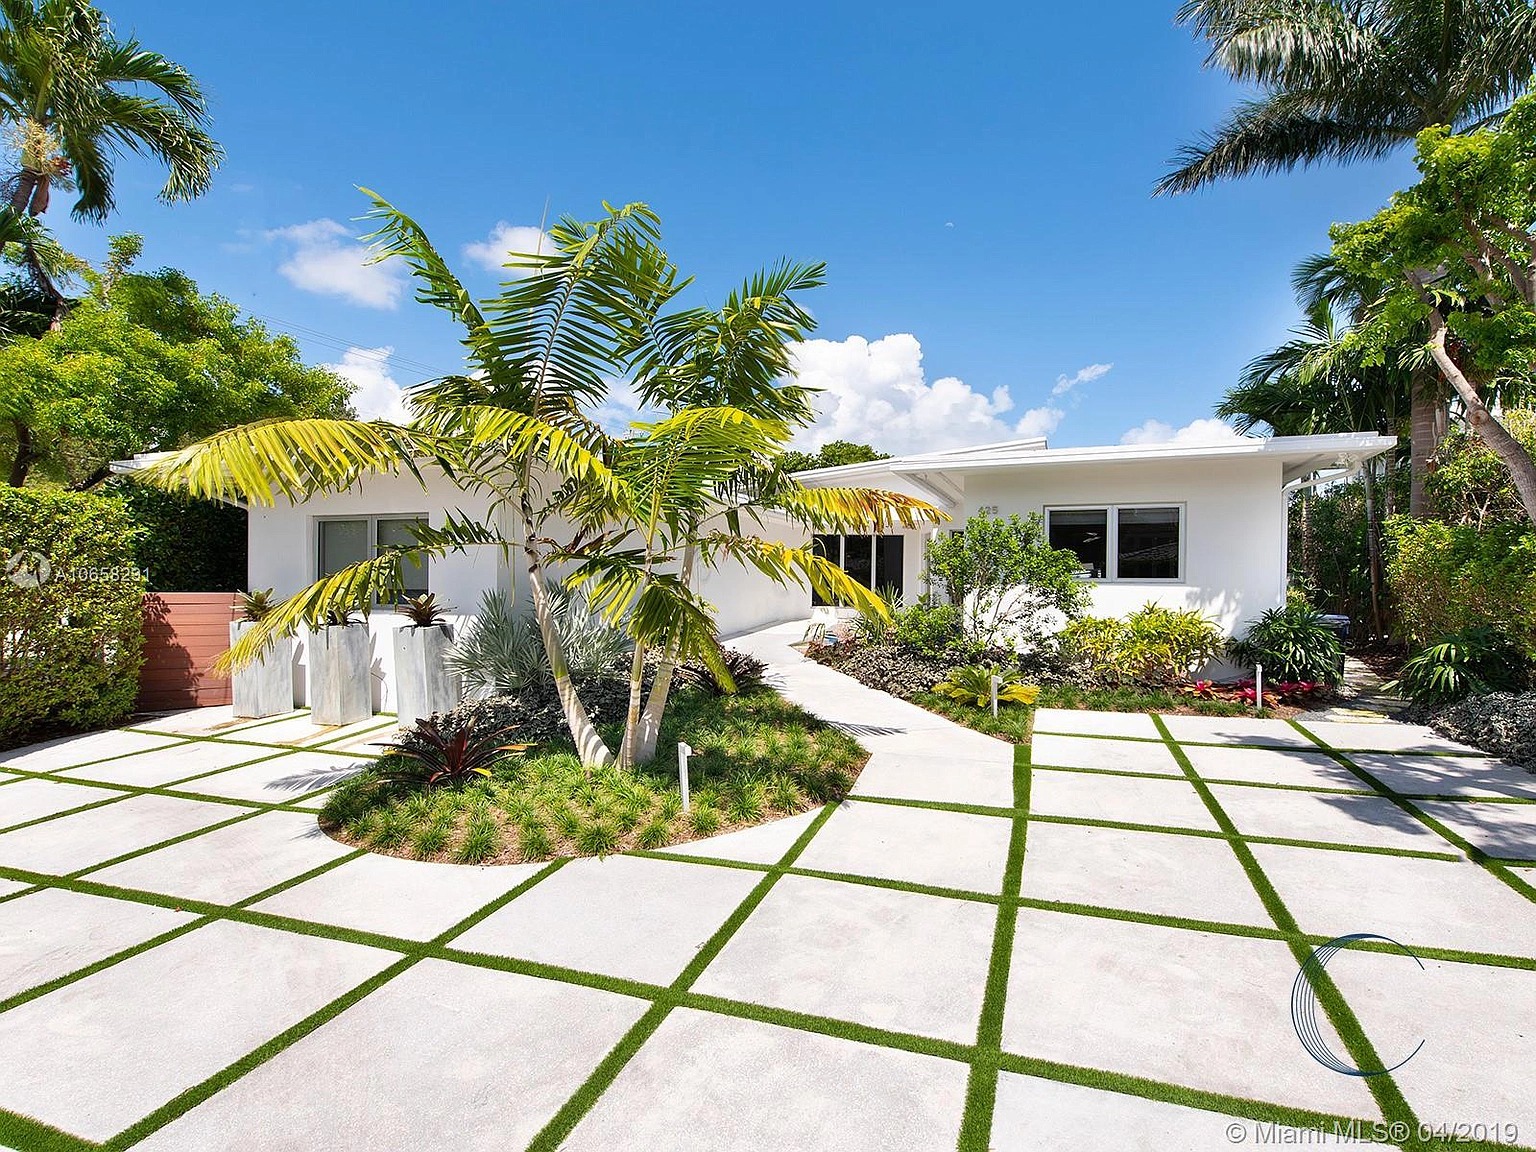 425 E Dilido Dr, Miami Beach, FL 33139 - $6,390,000 home for sale, house images, photos and pics gallery